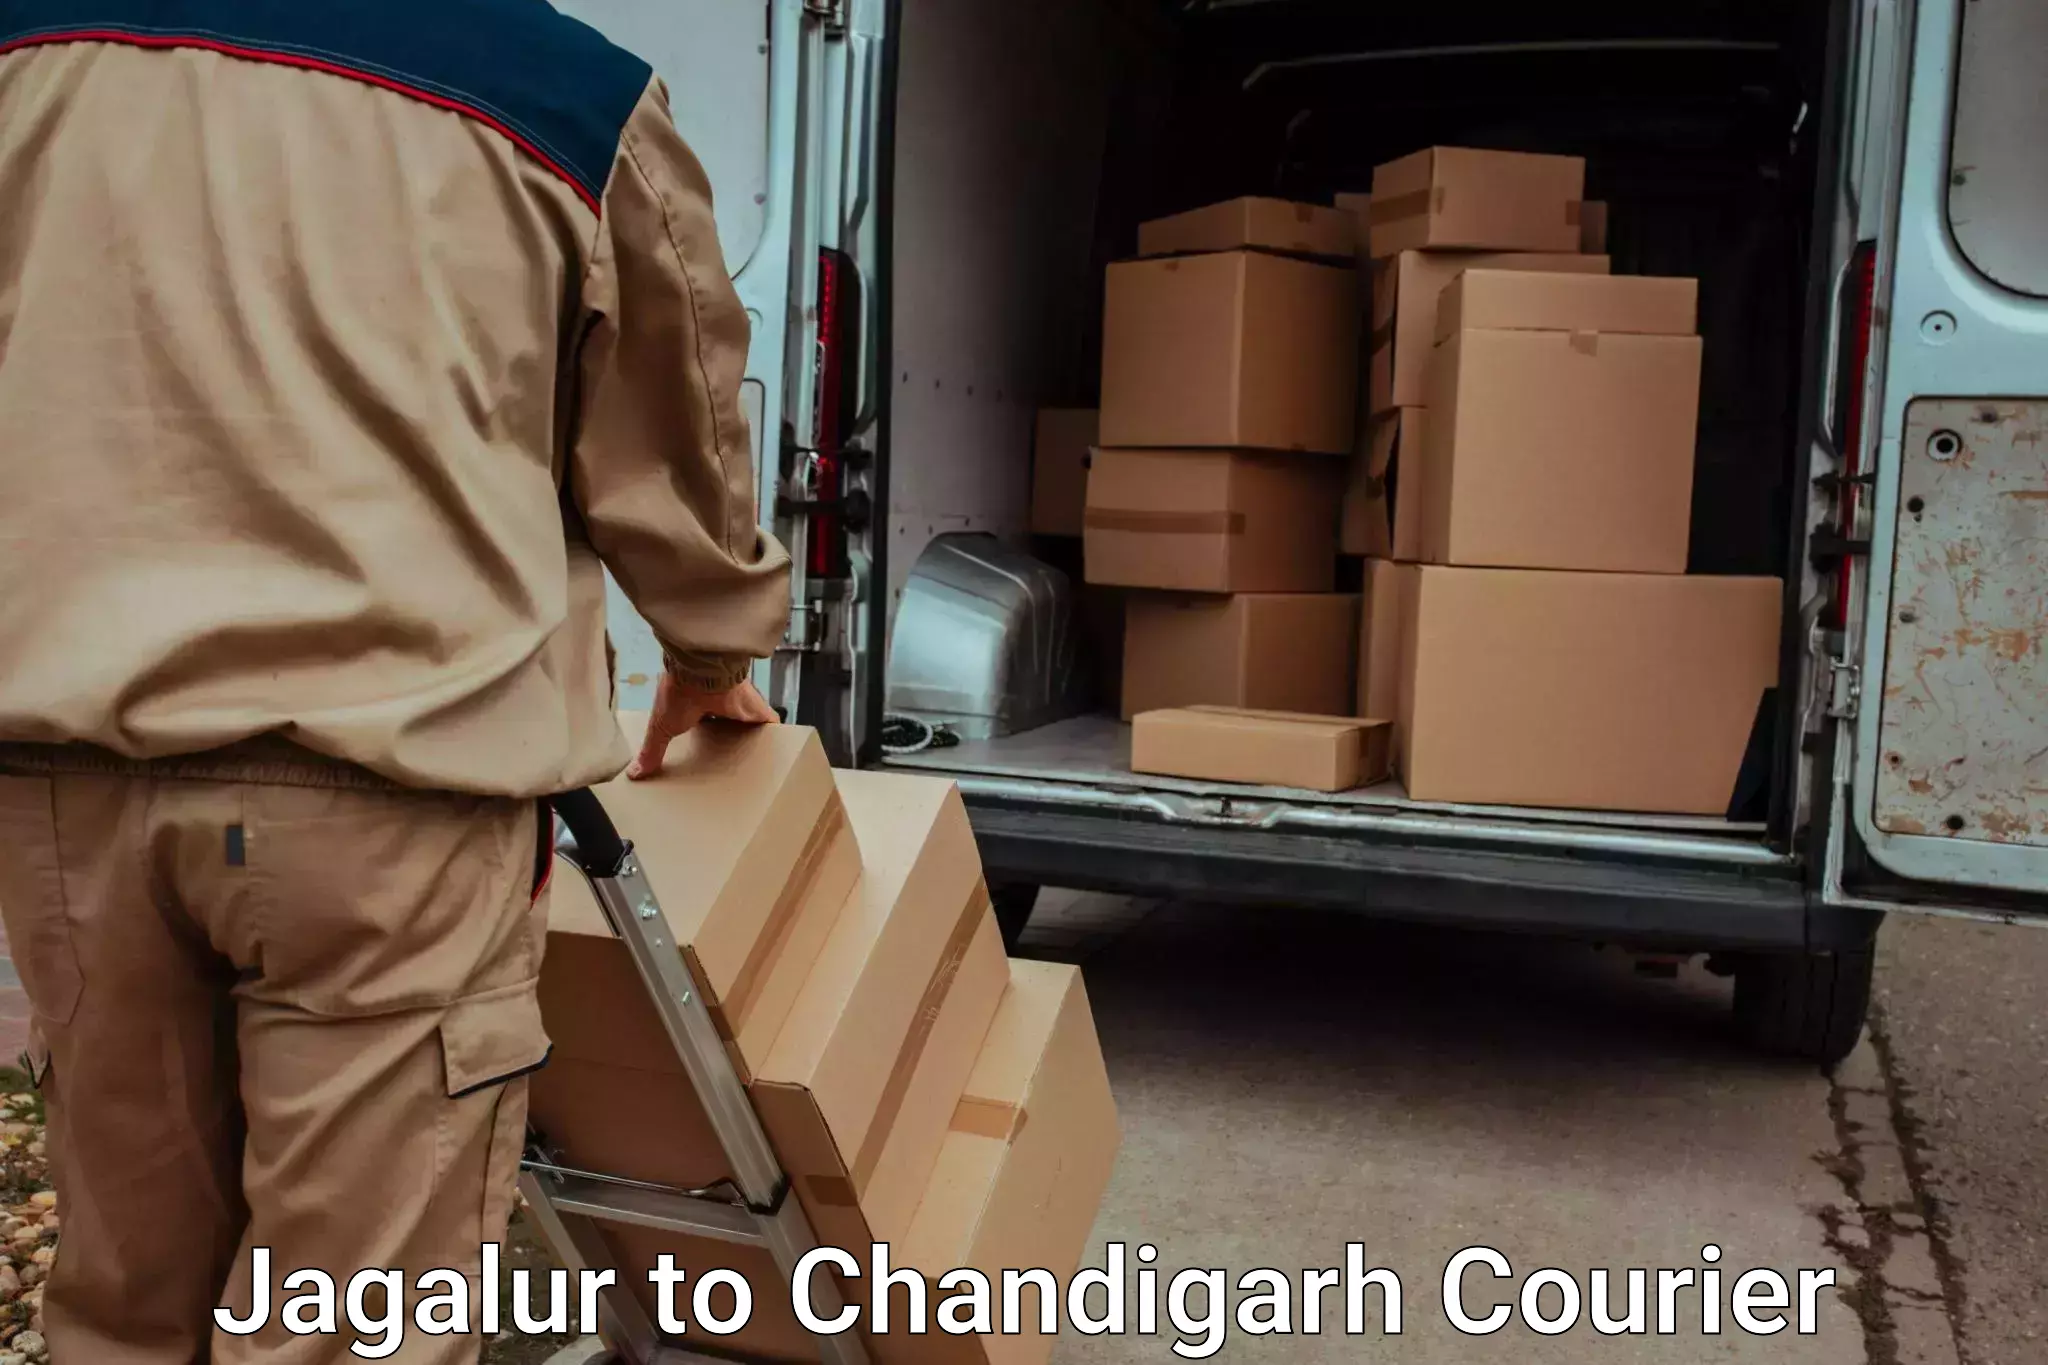 Reliable relocation services Jagalur to Chandigarh